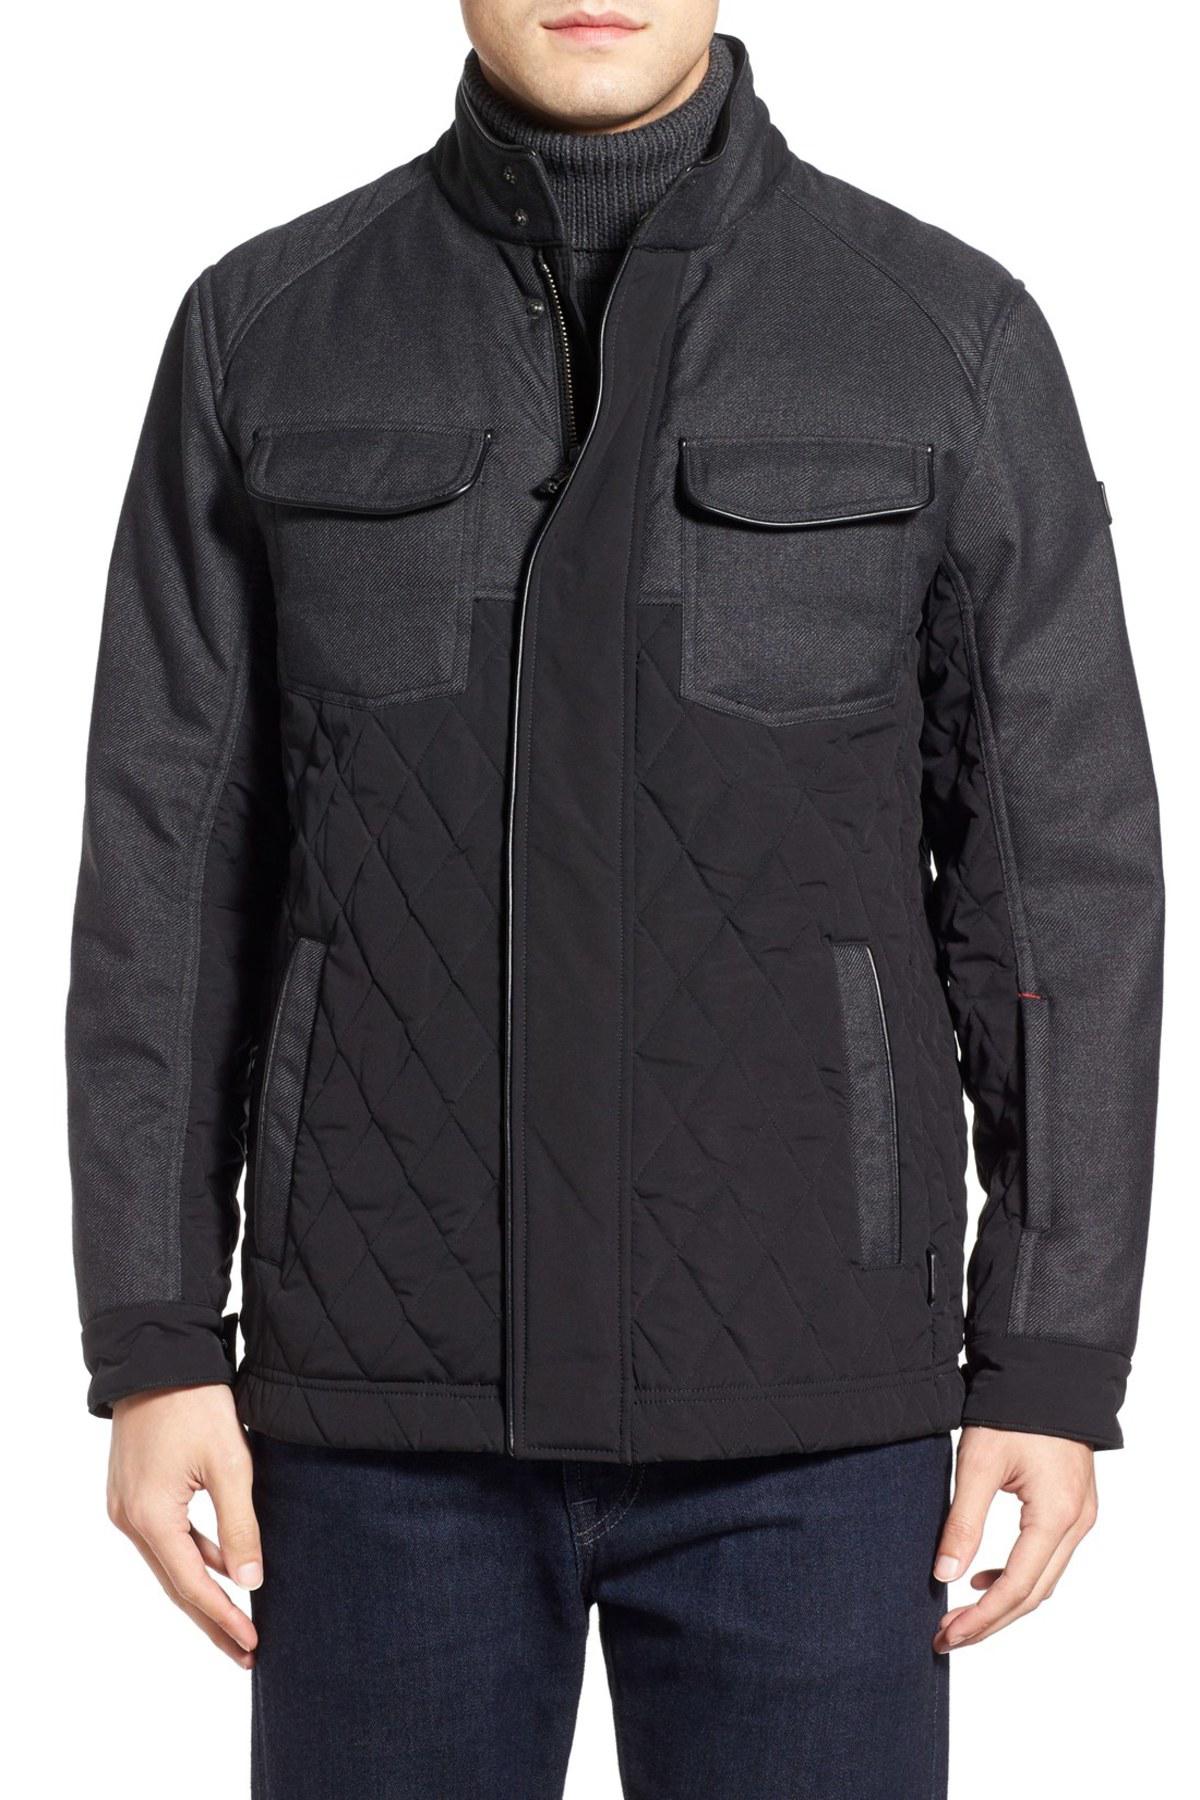 Tumi 'heritage' Quilted Jacket in Black 